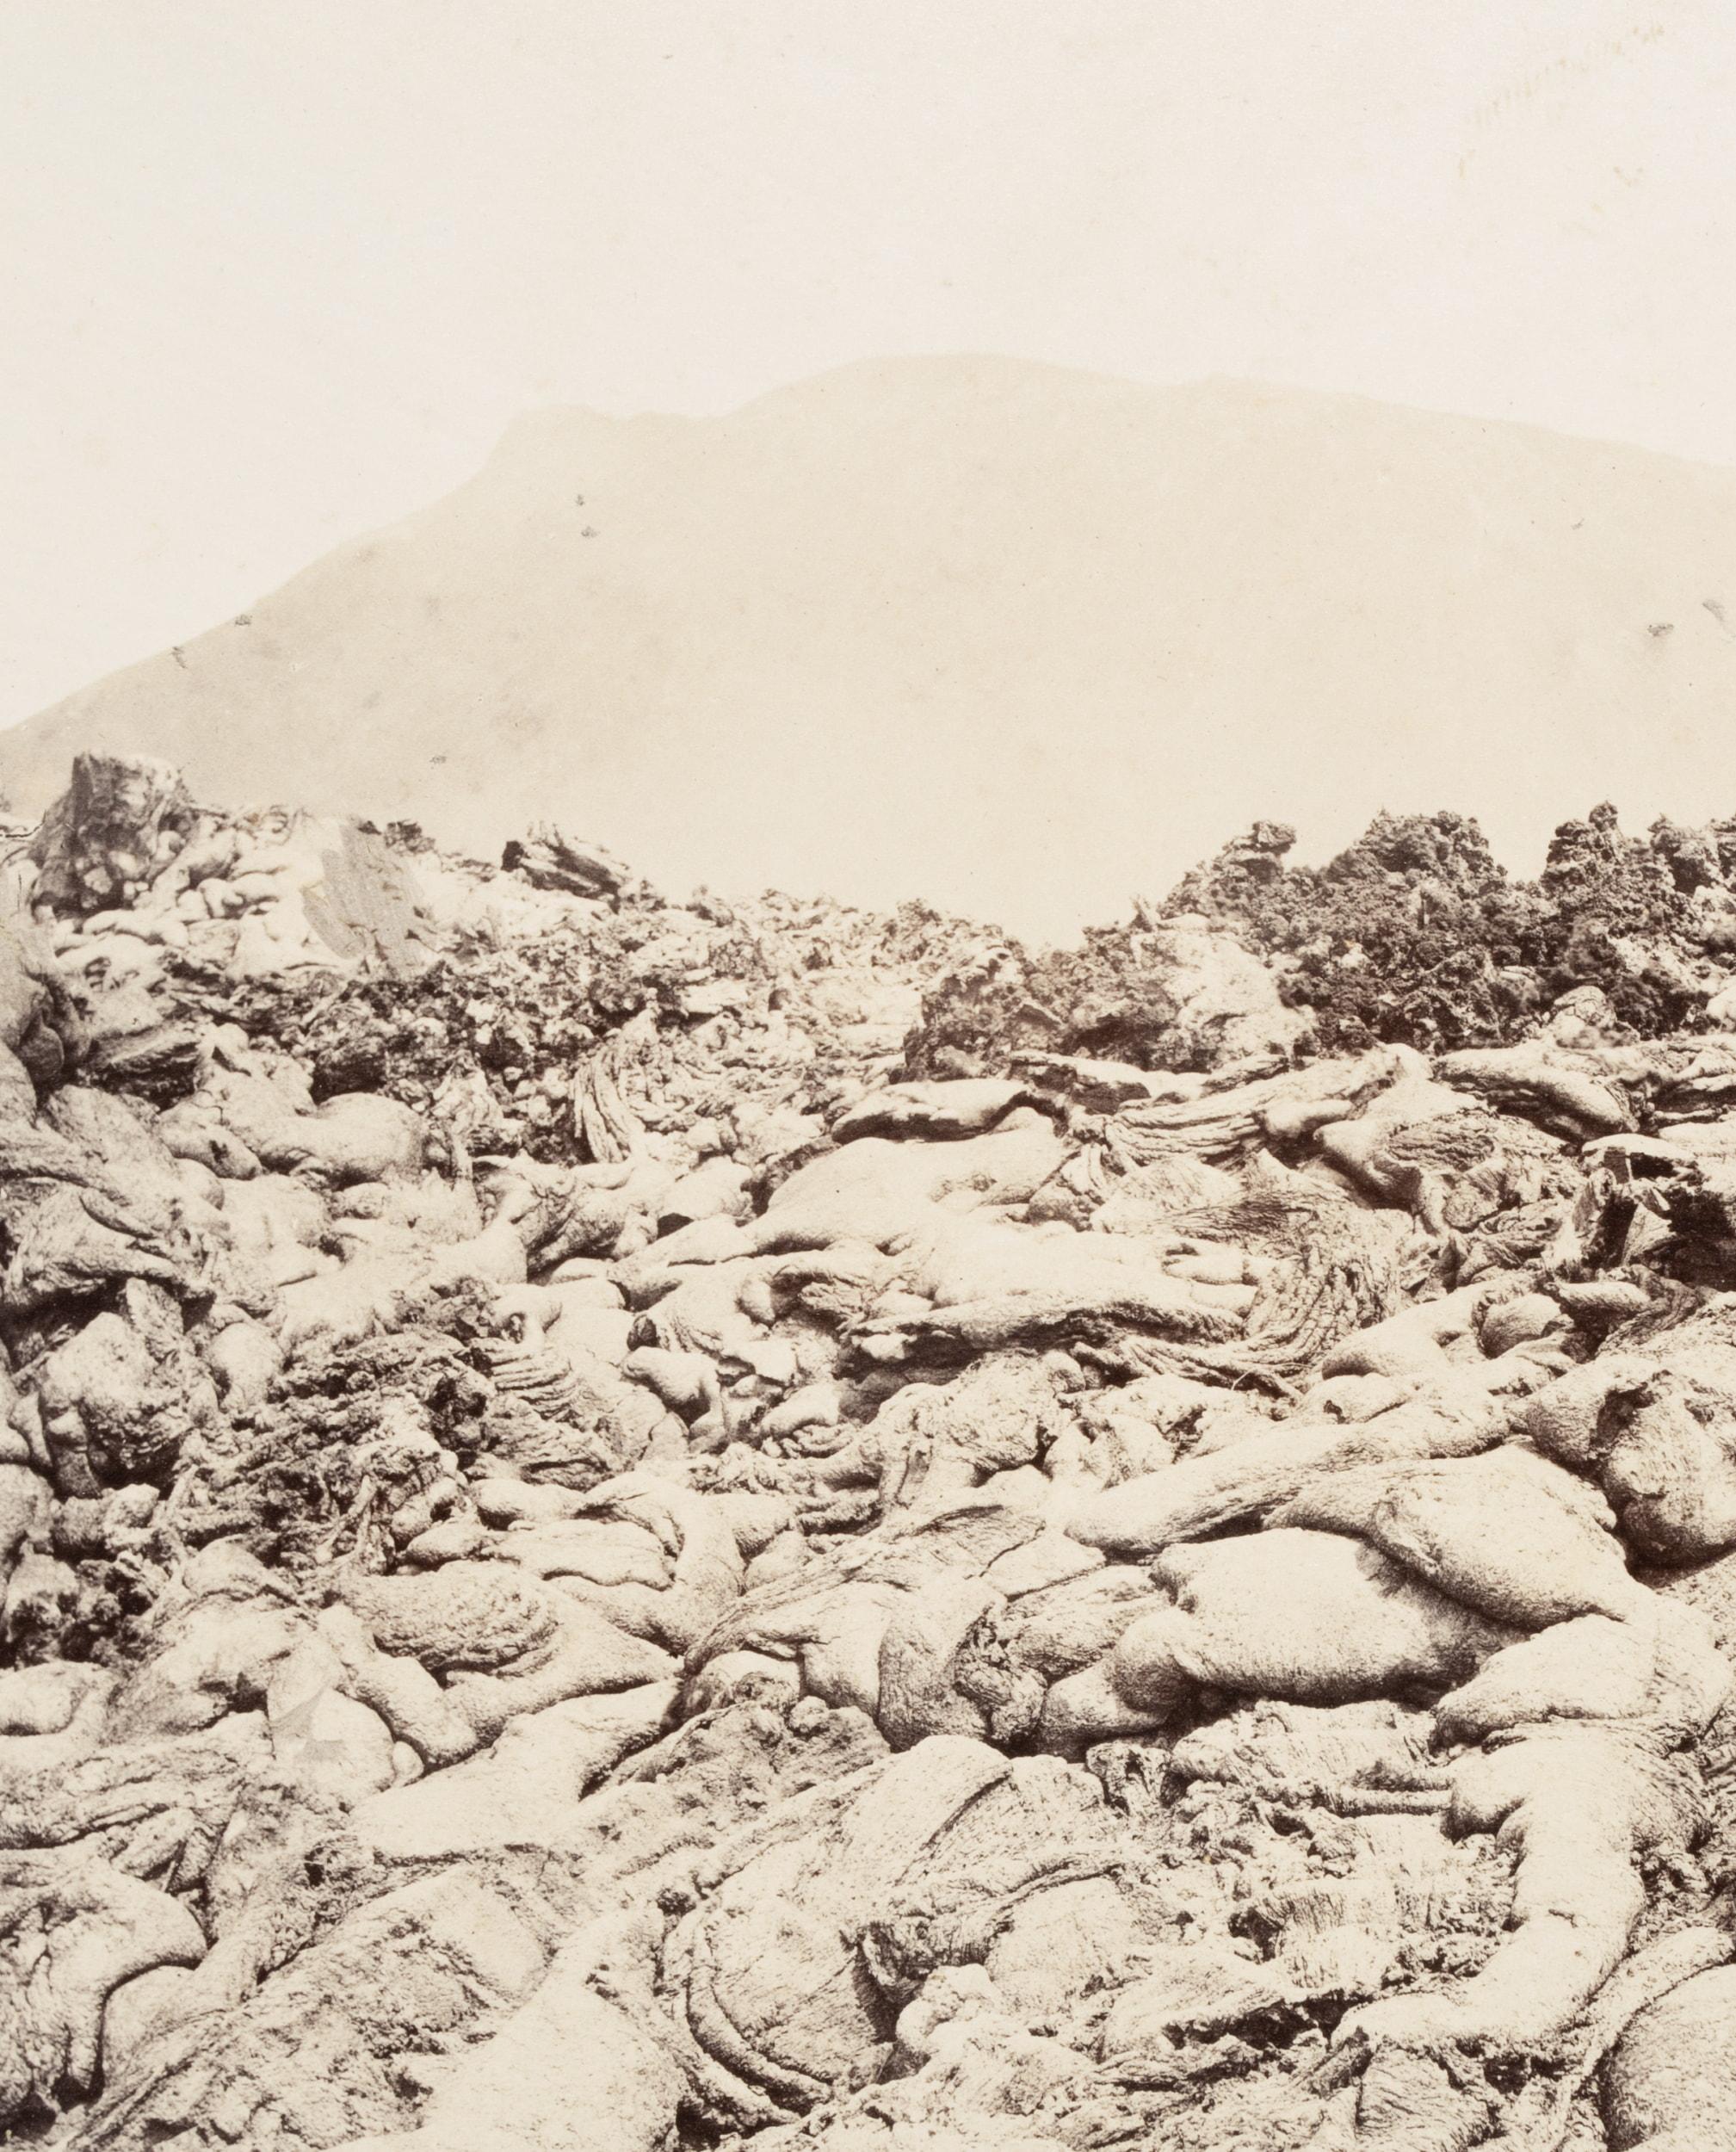 Roberto Rive (1817 - 1868 ): Mountain top with lava of Vesuvius, testimony of time, c. 1880, albumen paper print

Technique: albumen paper print, mounted on Cardboard

Inscription: lower left inscribed in the printing plate: 